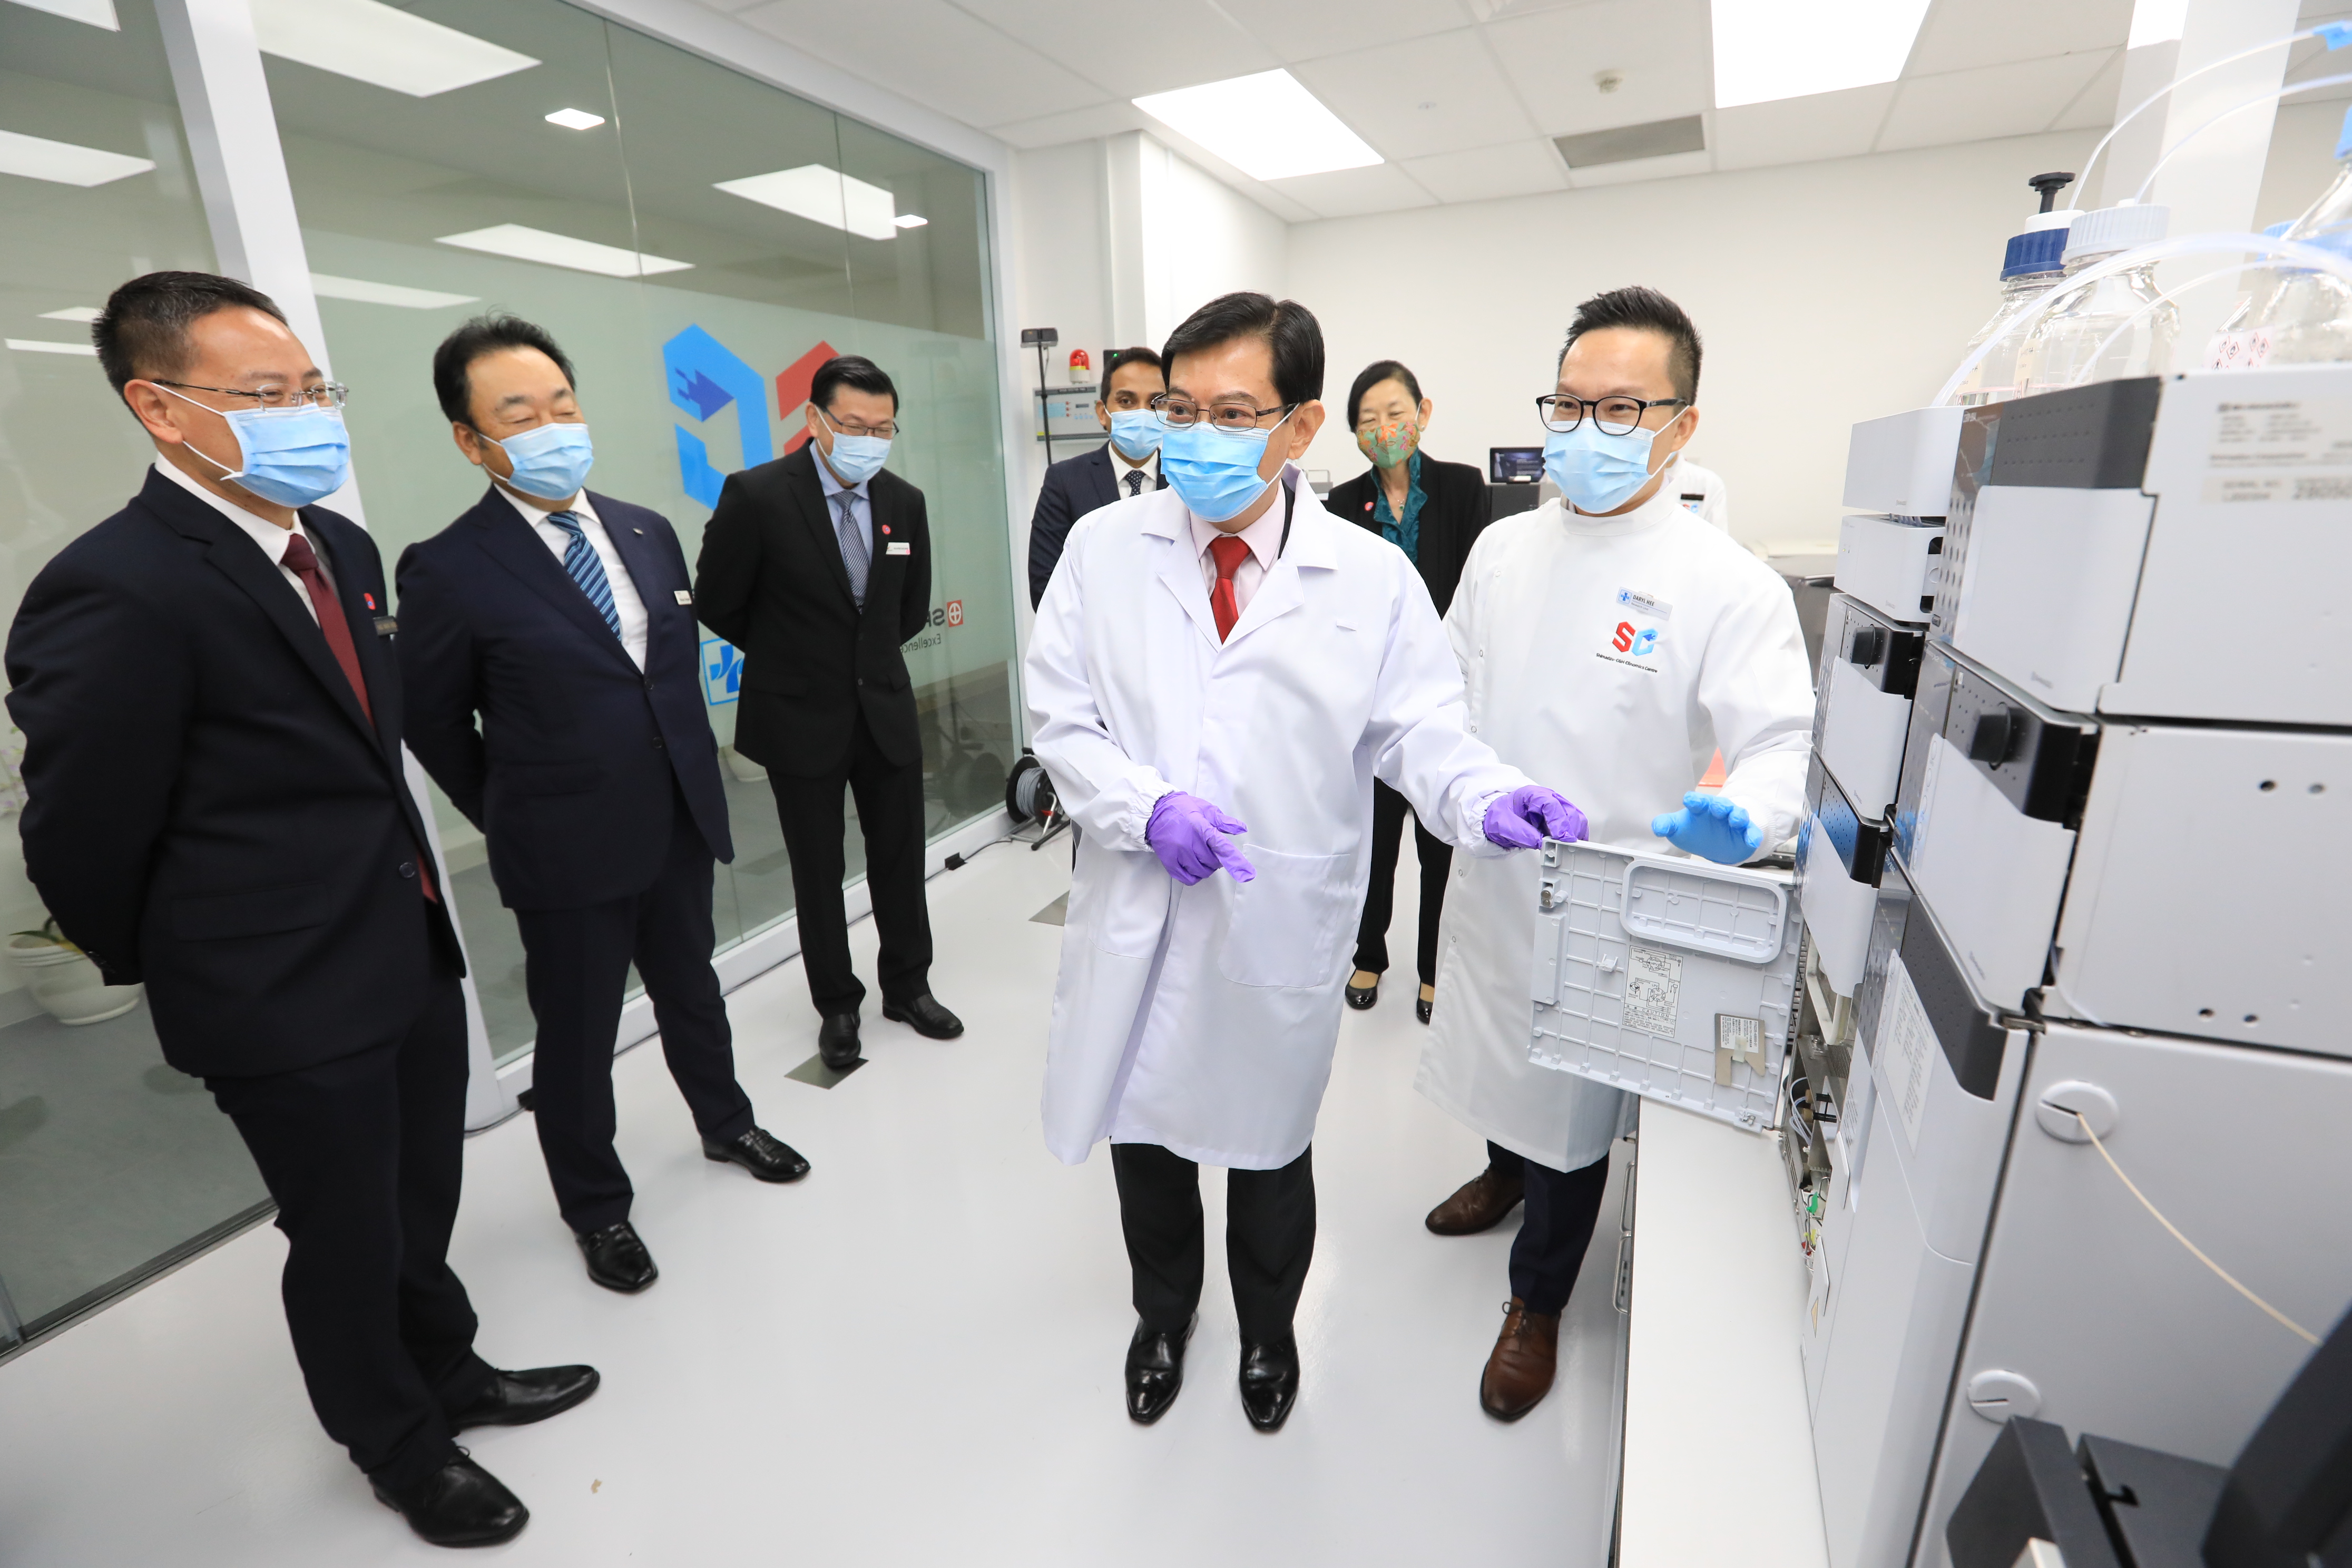 DPM Heng views the mass spectrometer at the Centre